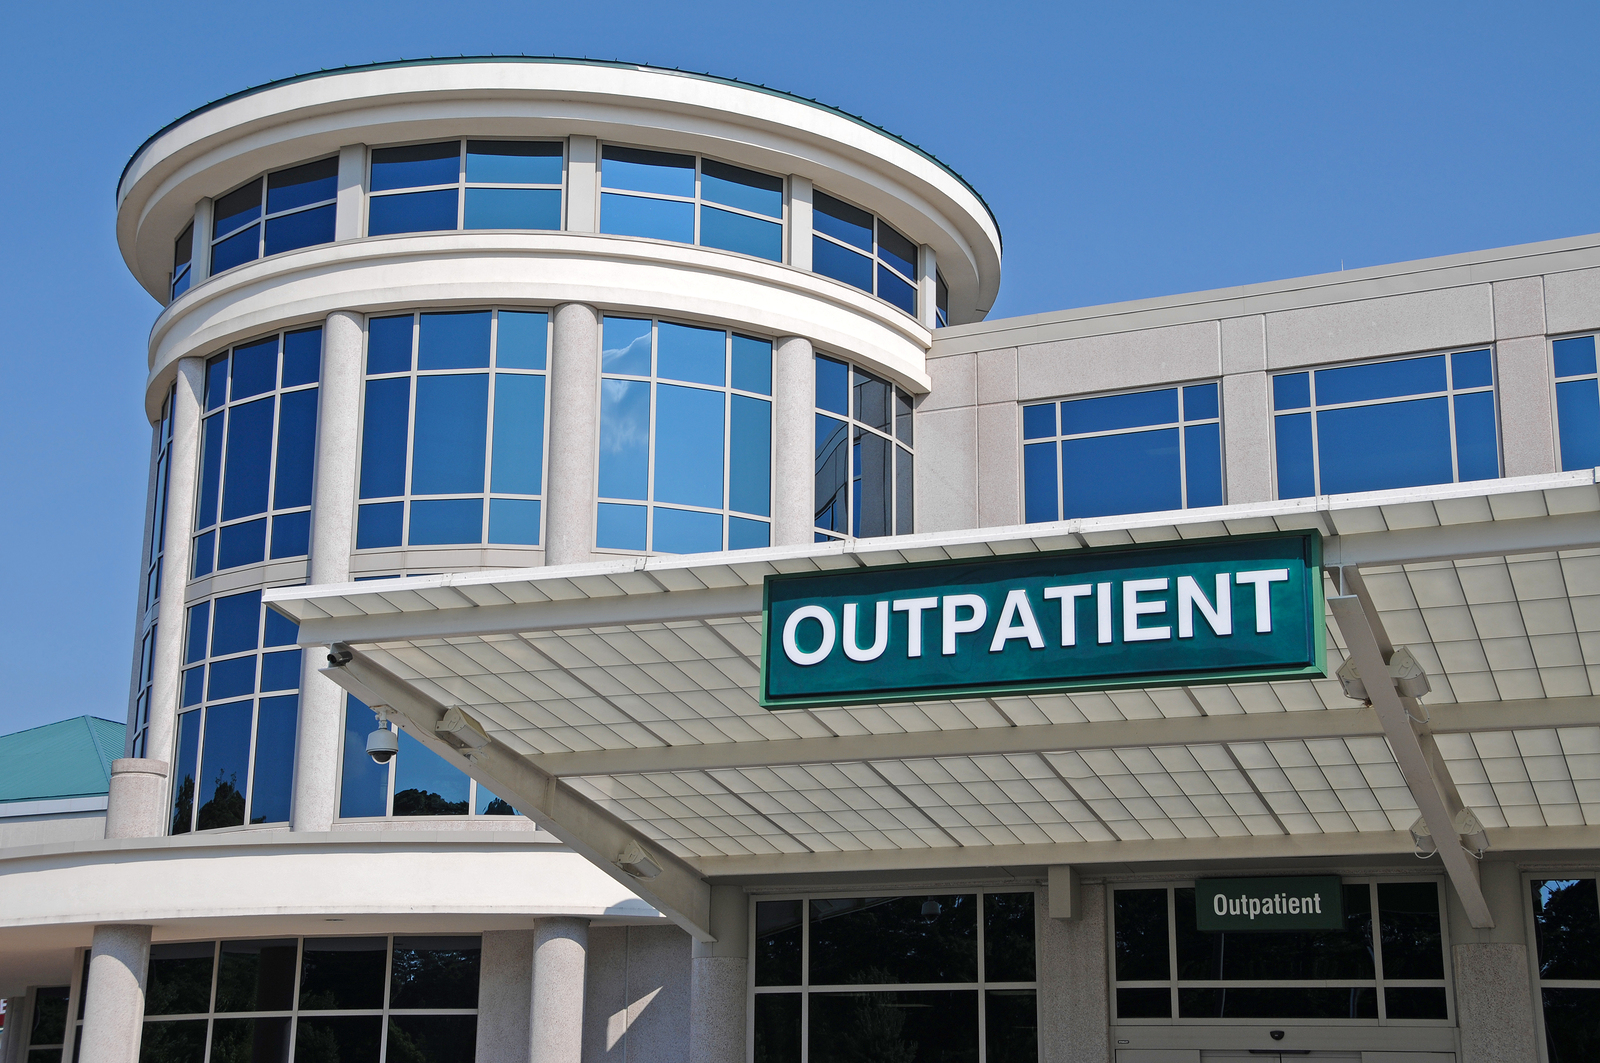 4 reasons to become an SLP in an outpatient setting